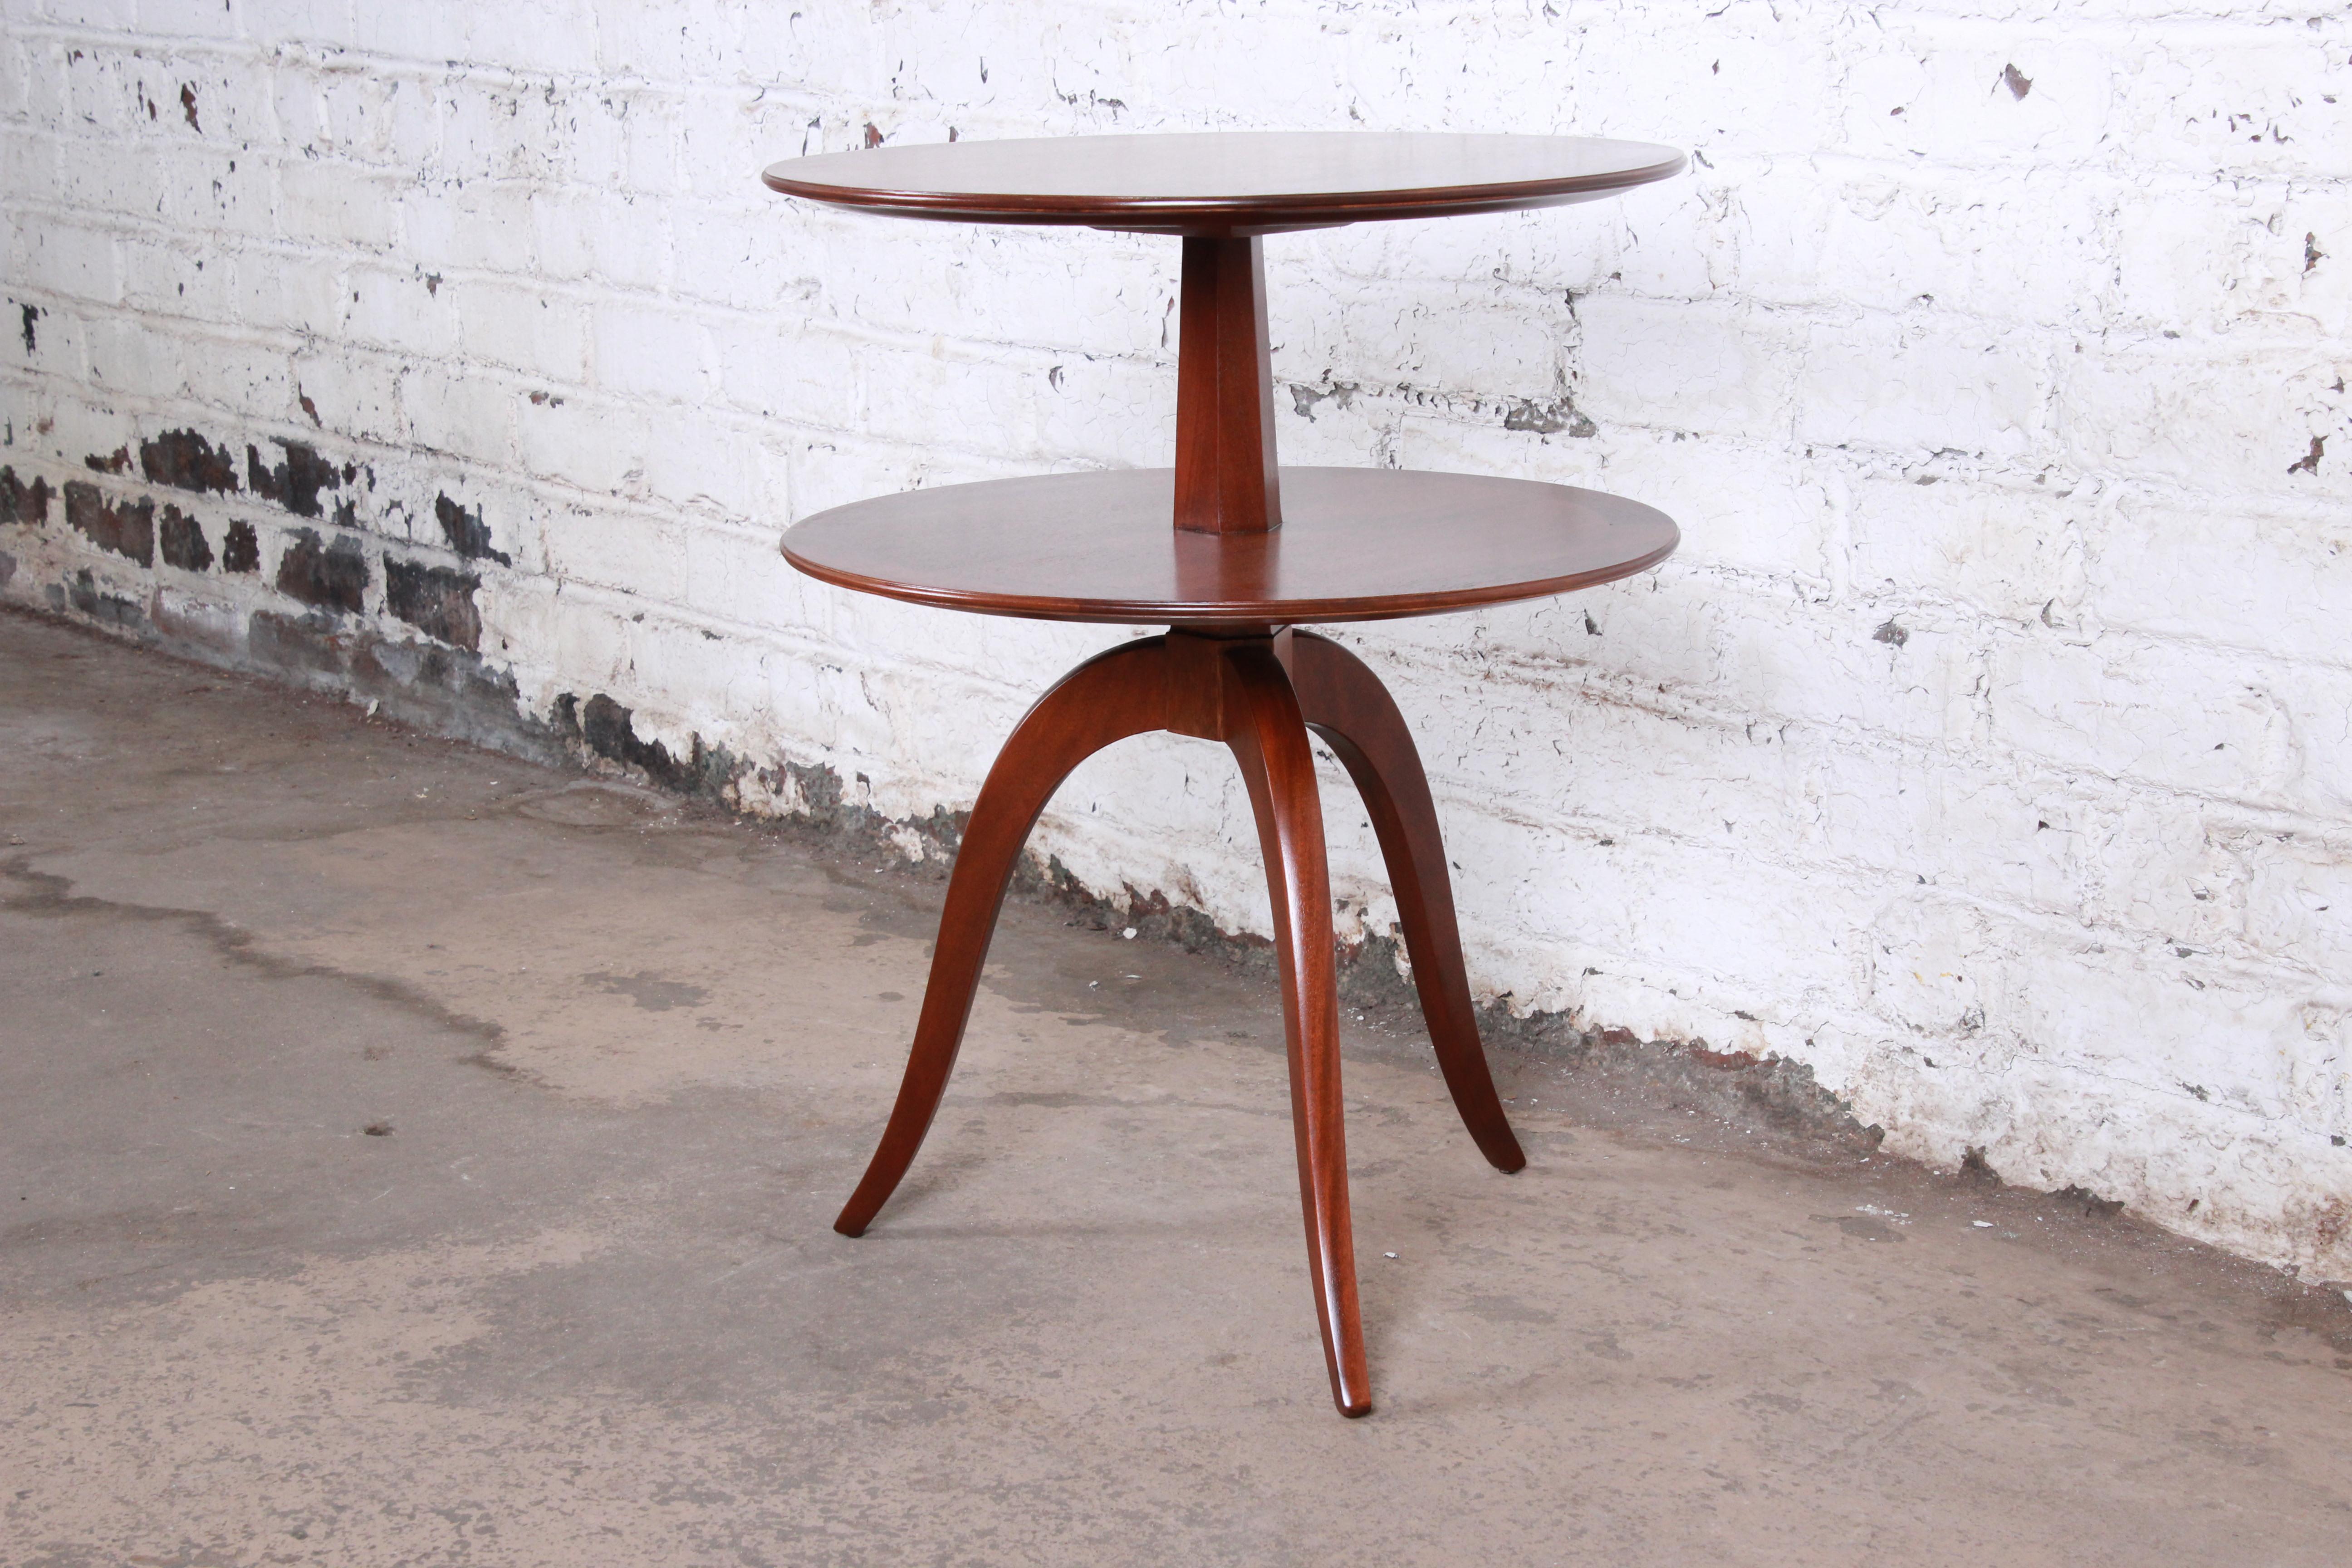 A rare and exceptional two-tiered round side table by Edward Wormley for Dunbar Furniture, circa 1940s. The table features stunning mahogany wood grain with a round pedestal top and tripod splayed leg base. The original early Dunbar label is